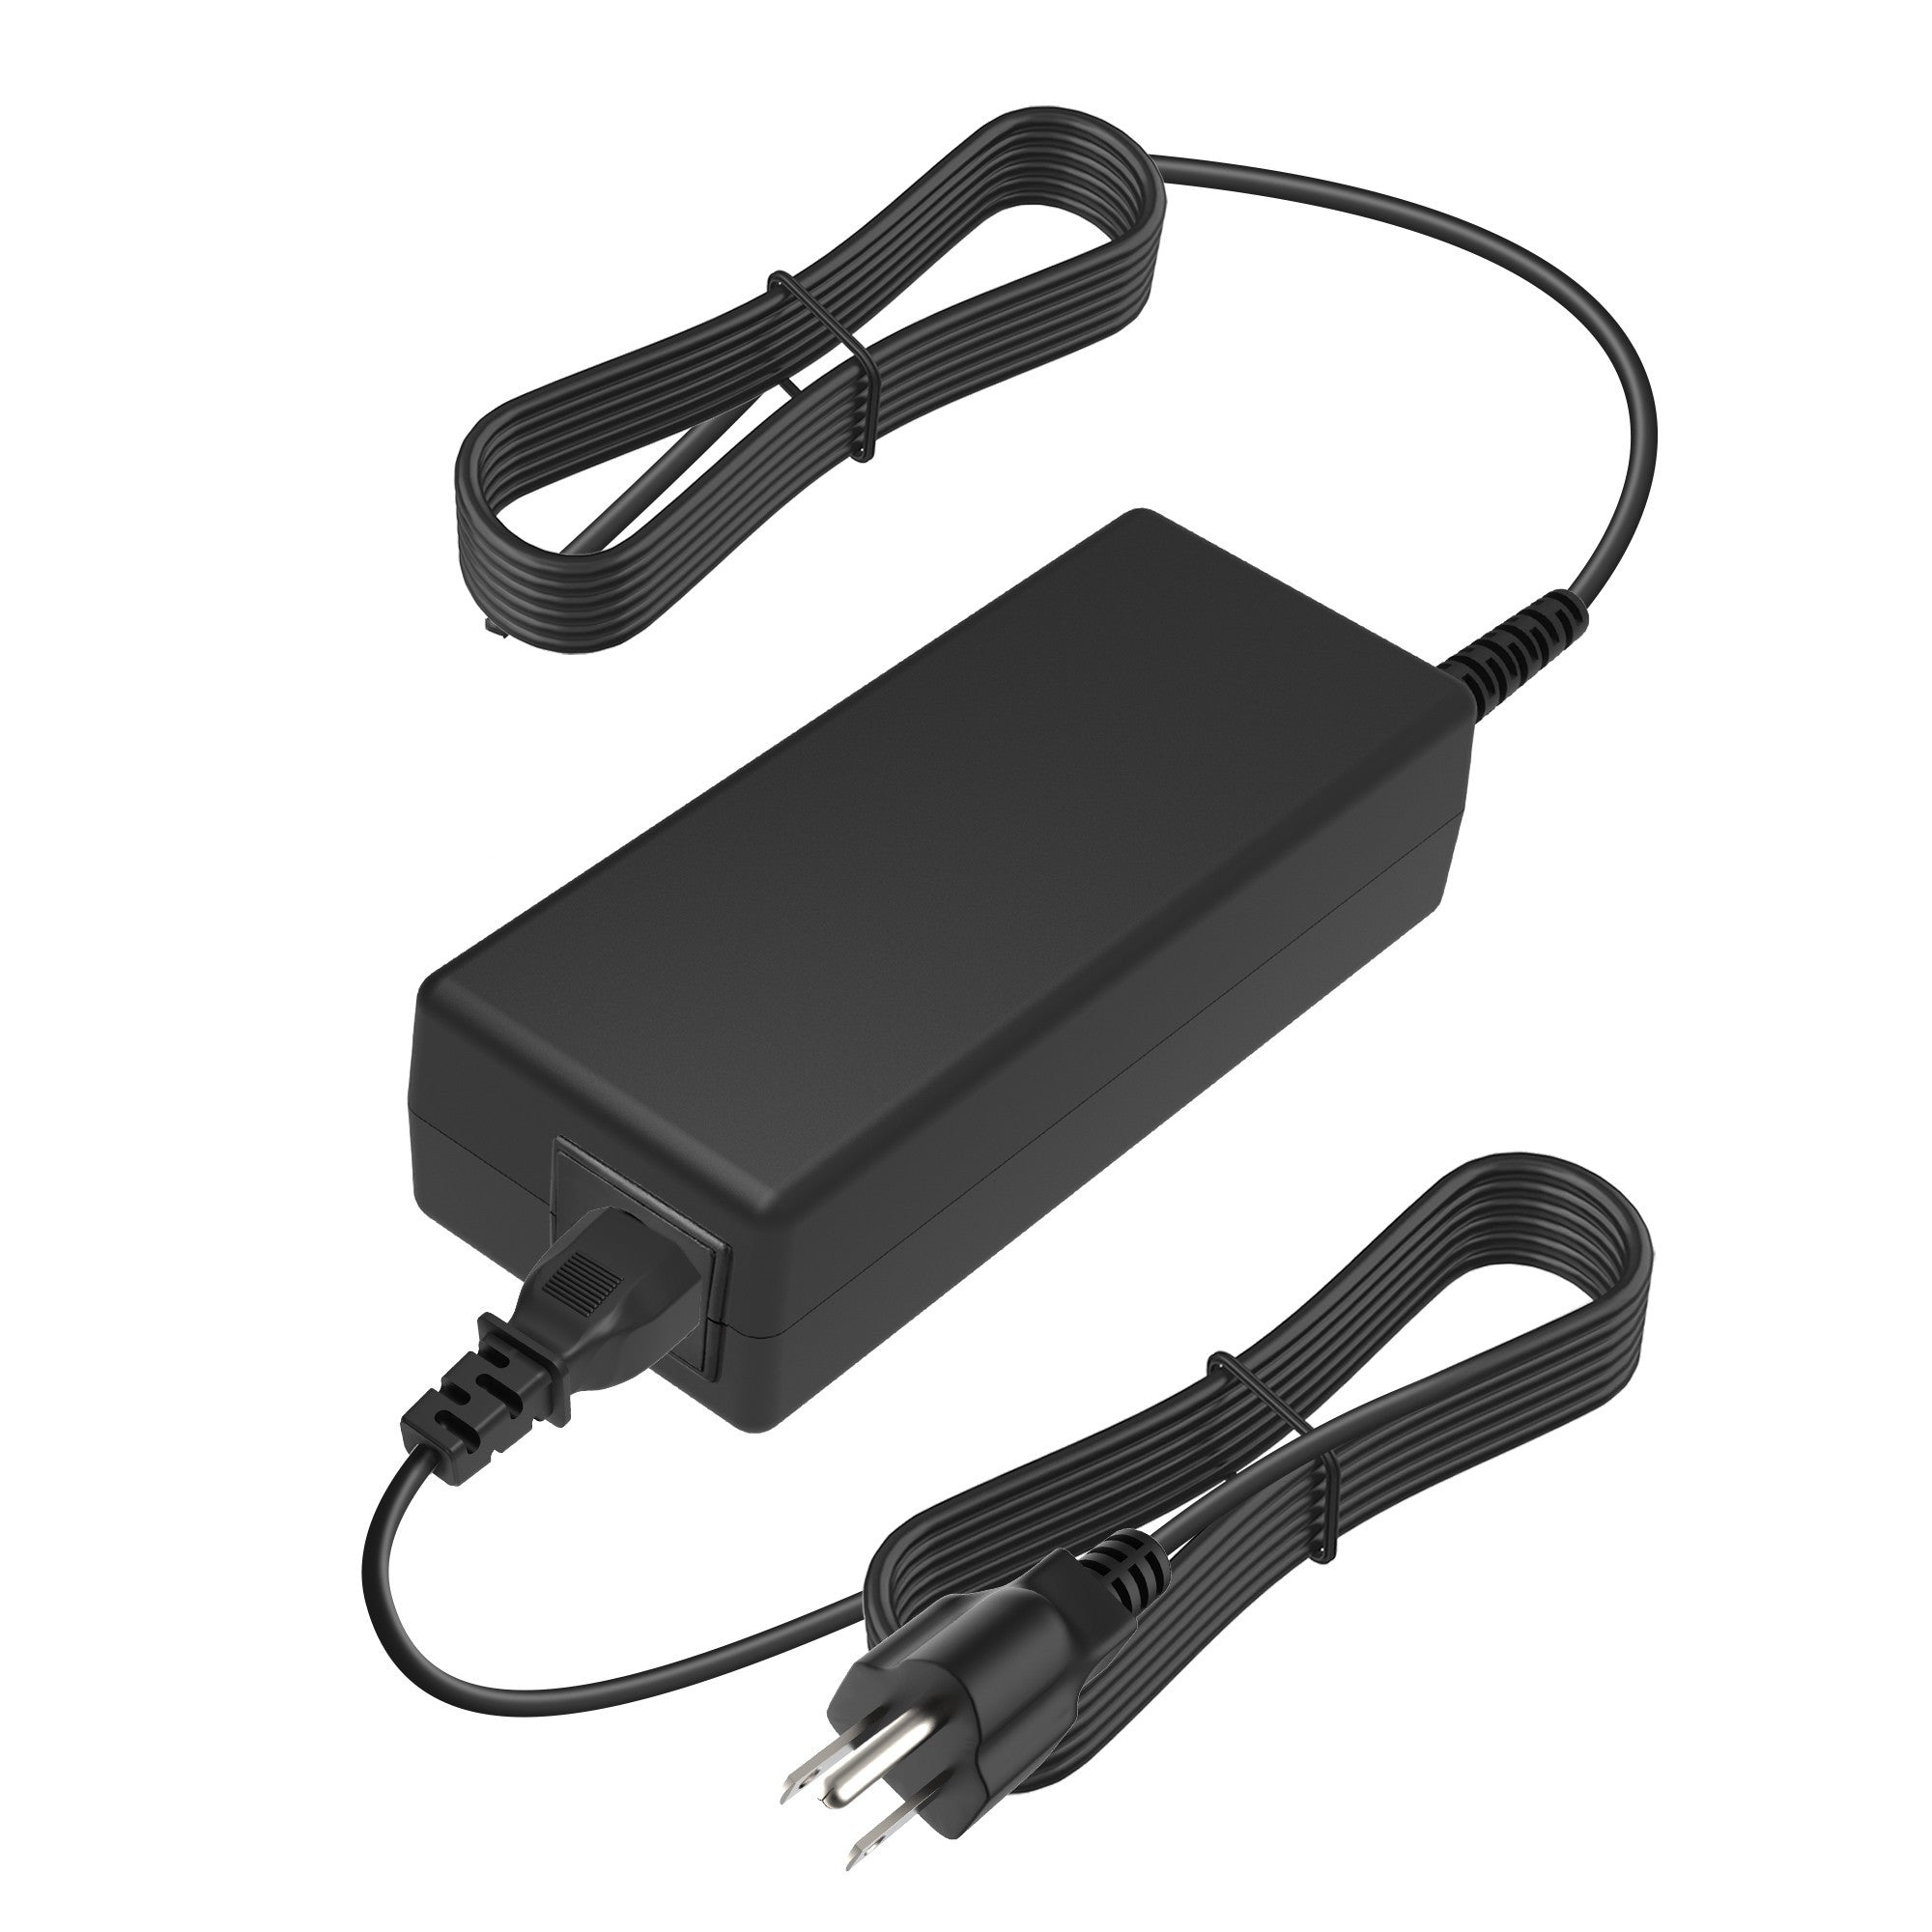 AbleGrid AC/DC ADAPTER Compatible with Toshiba Satellite S75-A7221 S75-A7222 S75-A7270 S75-A7331 S75-A7334 S75-A7344 Laptop Notebook PC Battery Charger Mains PSU